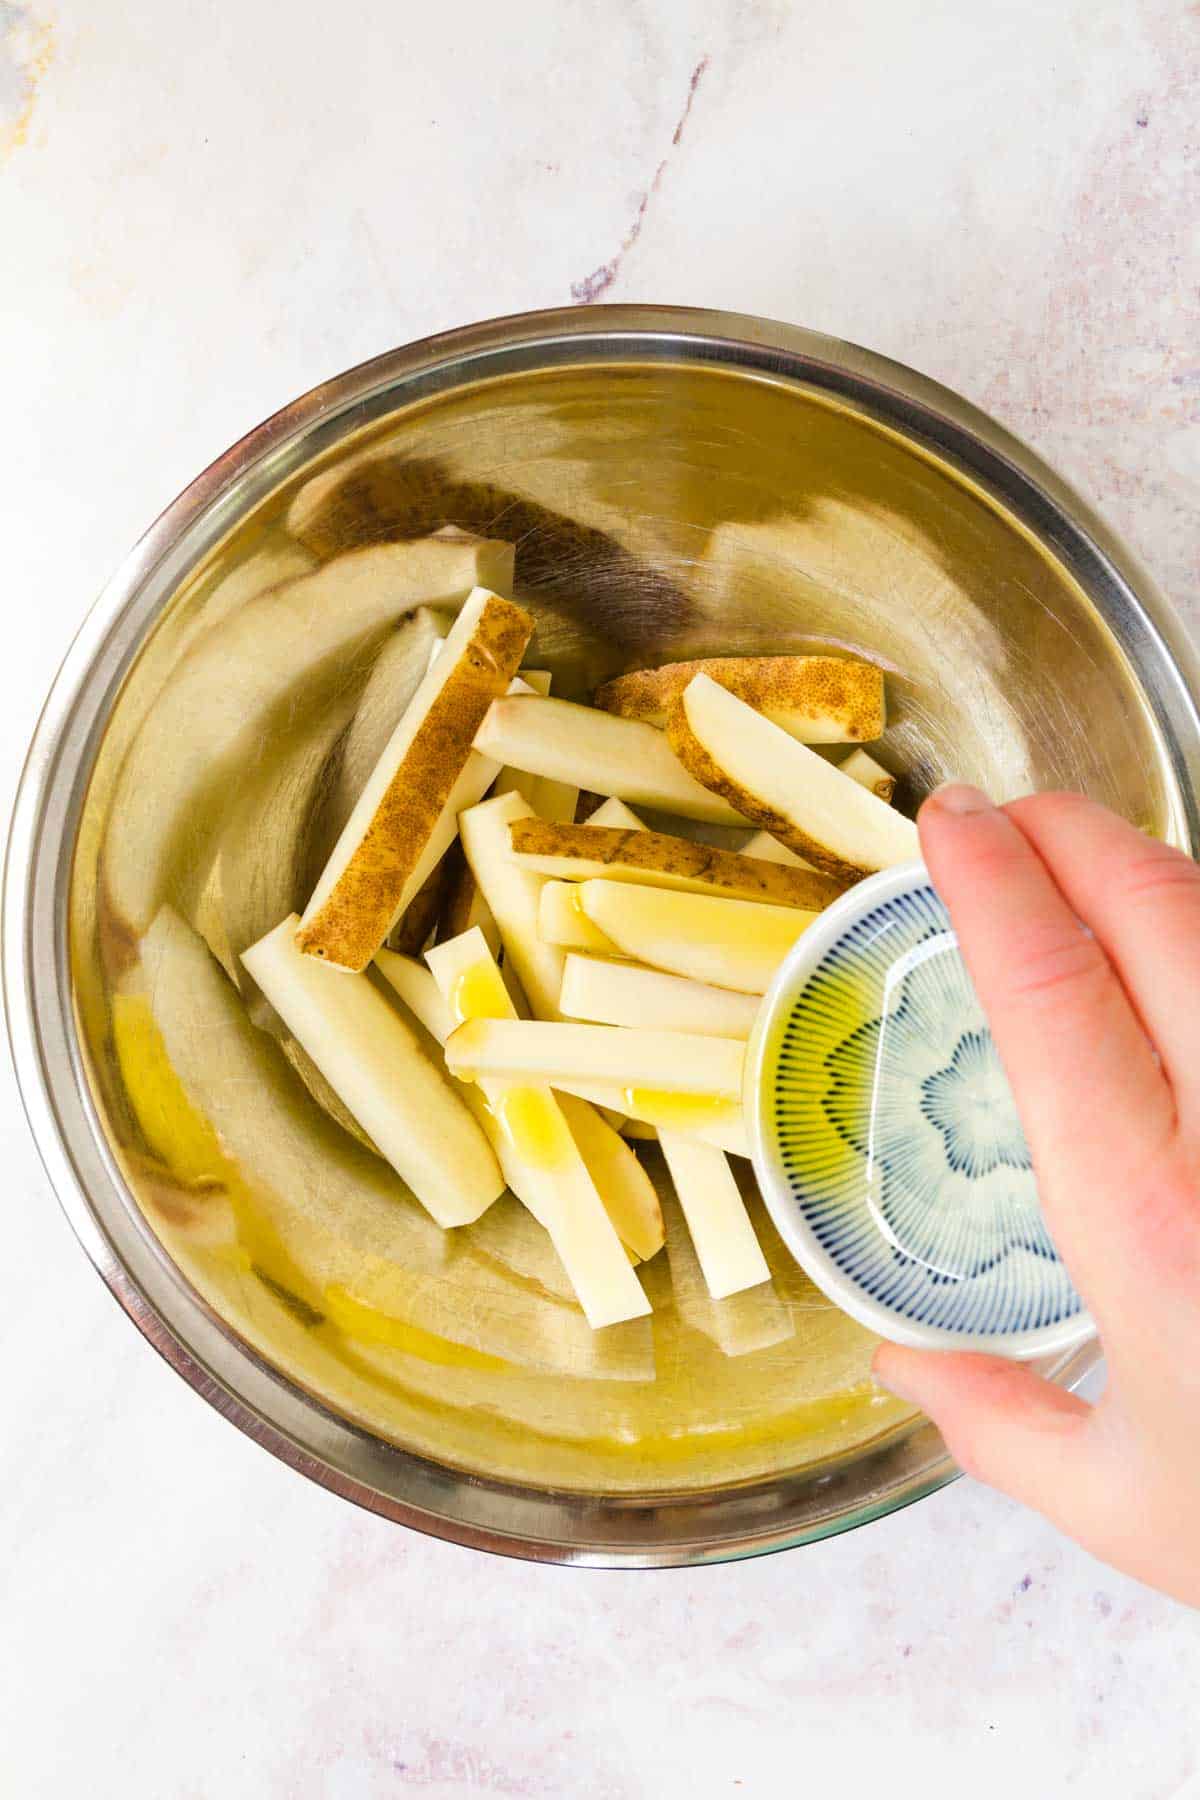 A tablespoon of oil being poured into a large bowl filled with unbaked french fries